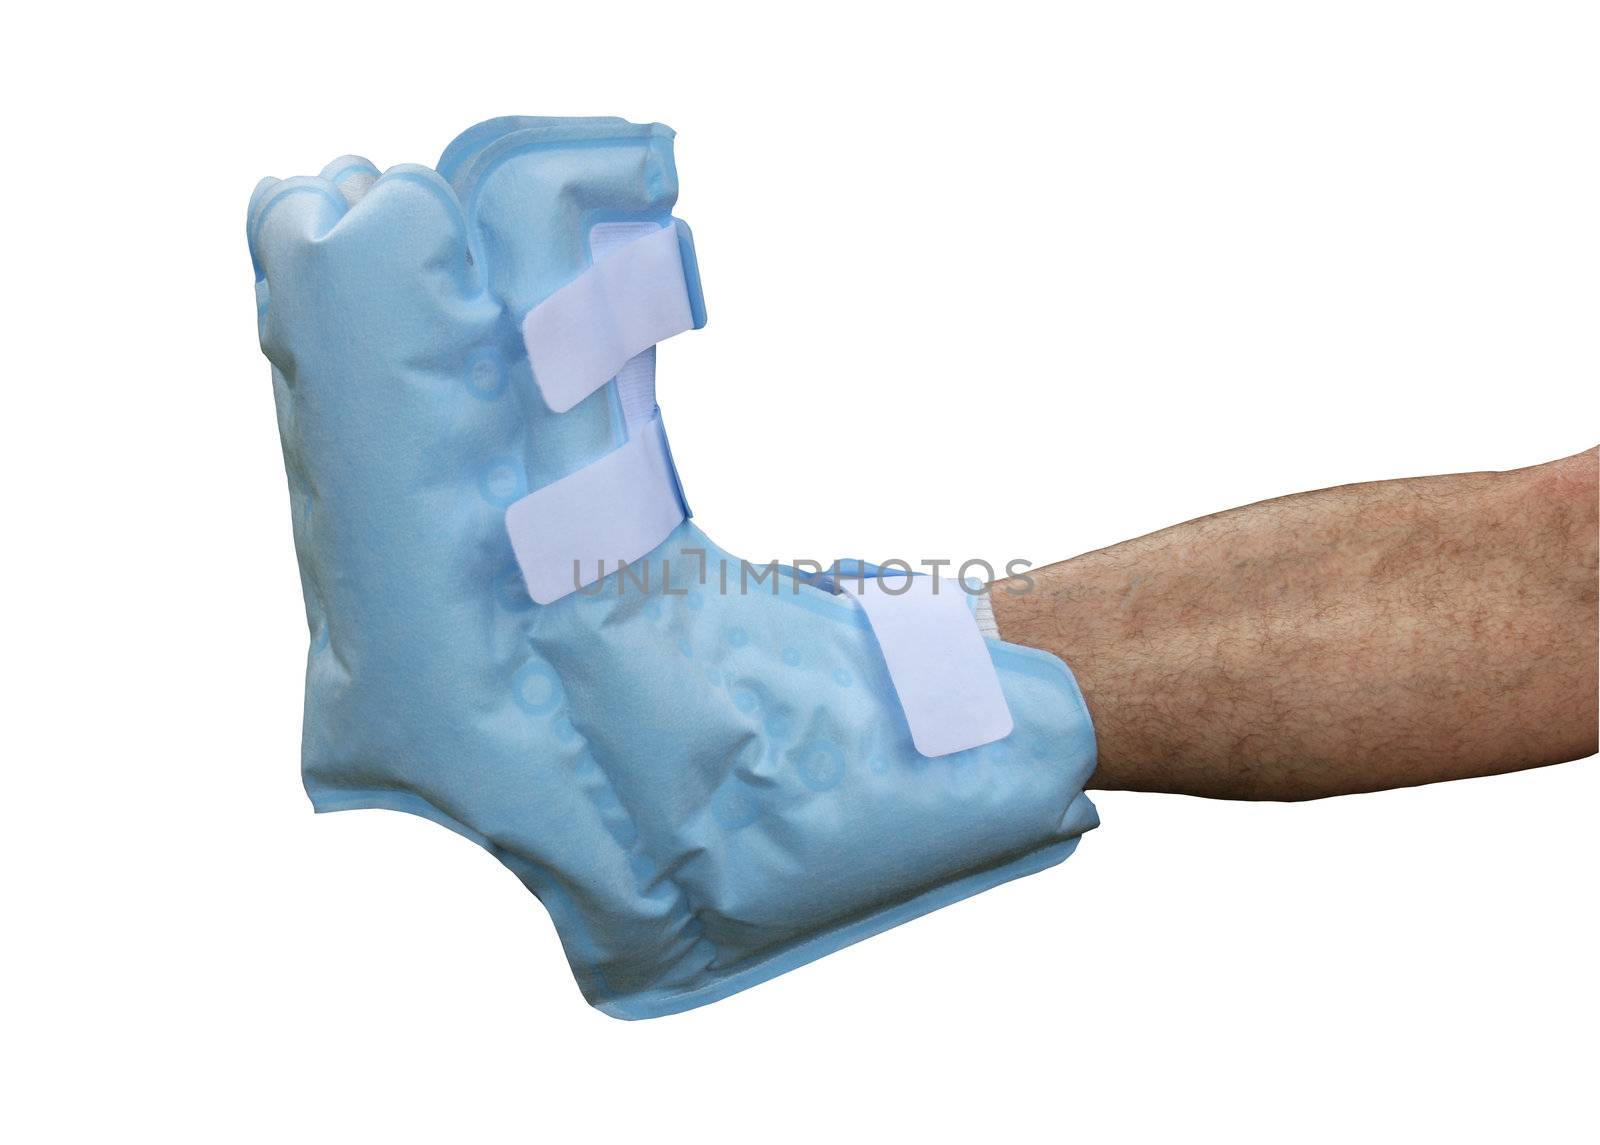 soft boot cast on right foot isolated with clipping path at this size